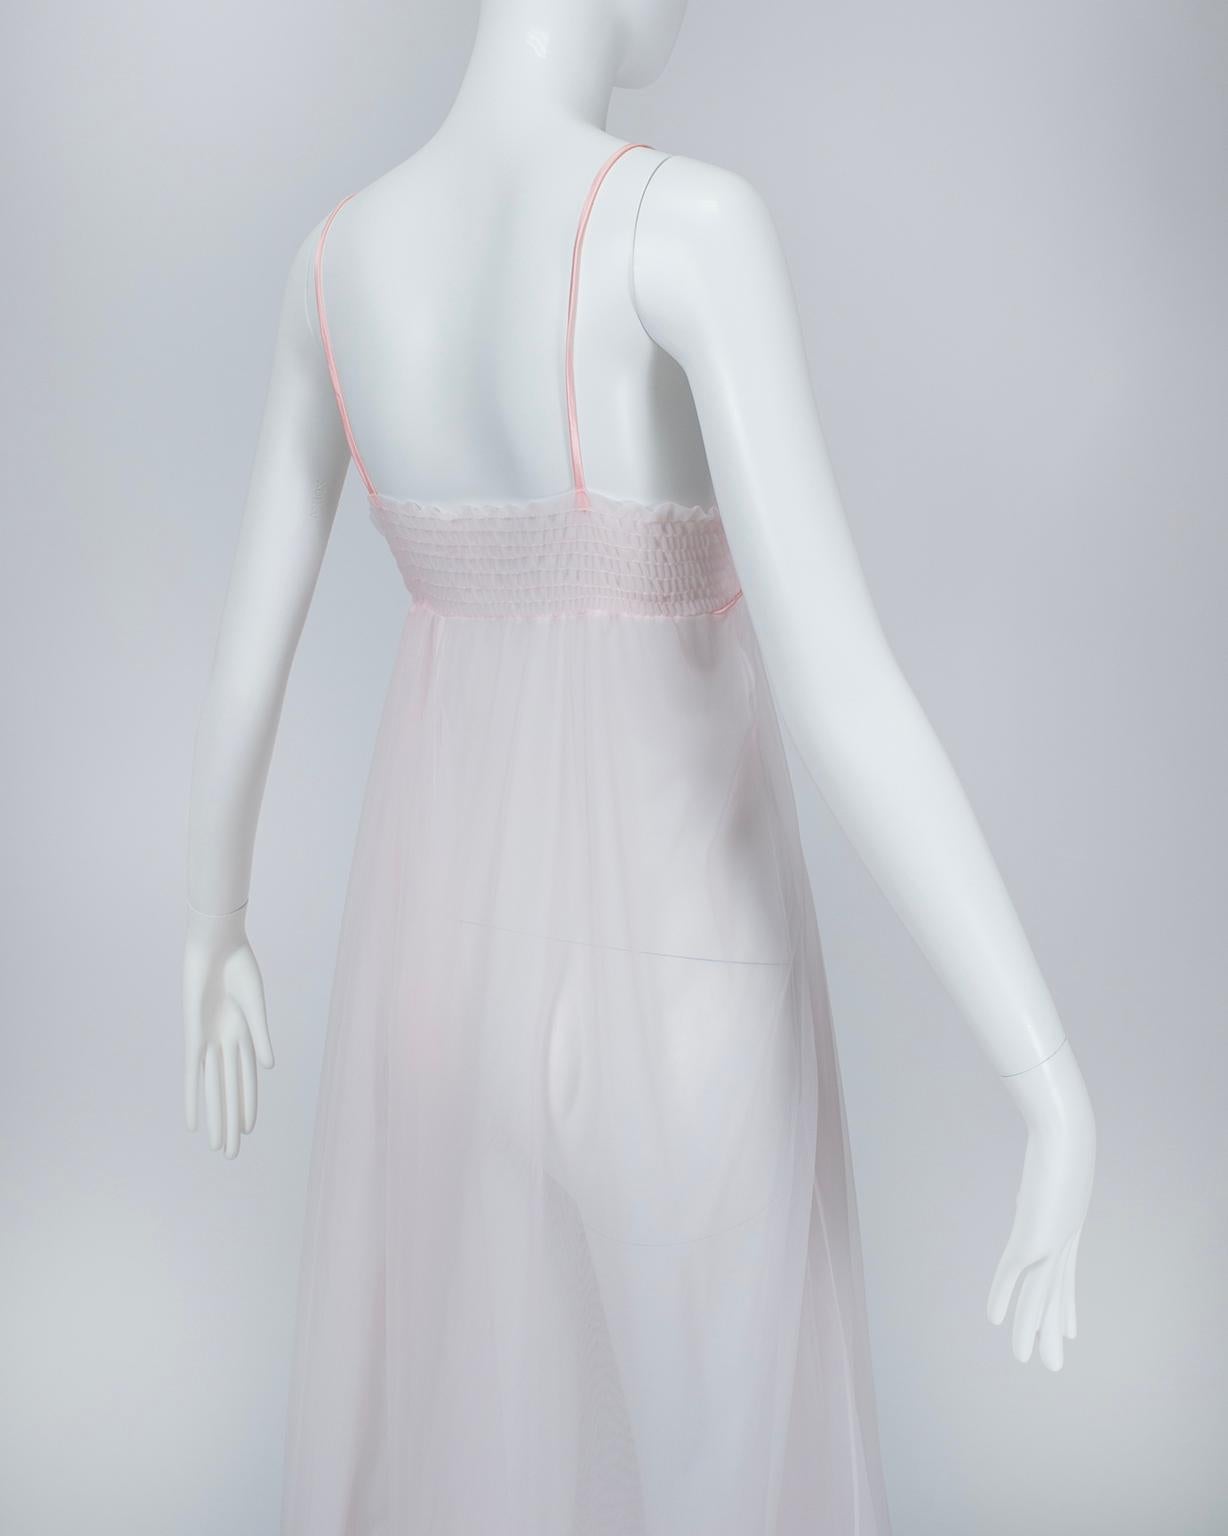 Blush Pink Powder Puff Negligée Nightgown with Marabou Feather Ties - S-M, 1960s In Good Condition For Sale In Tucson, AZ